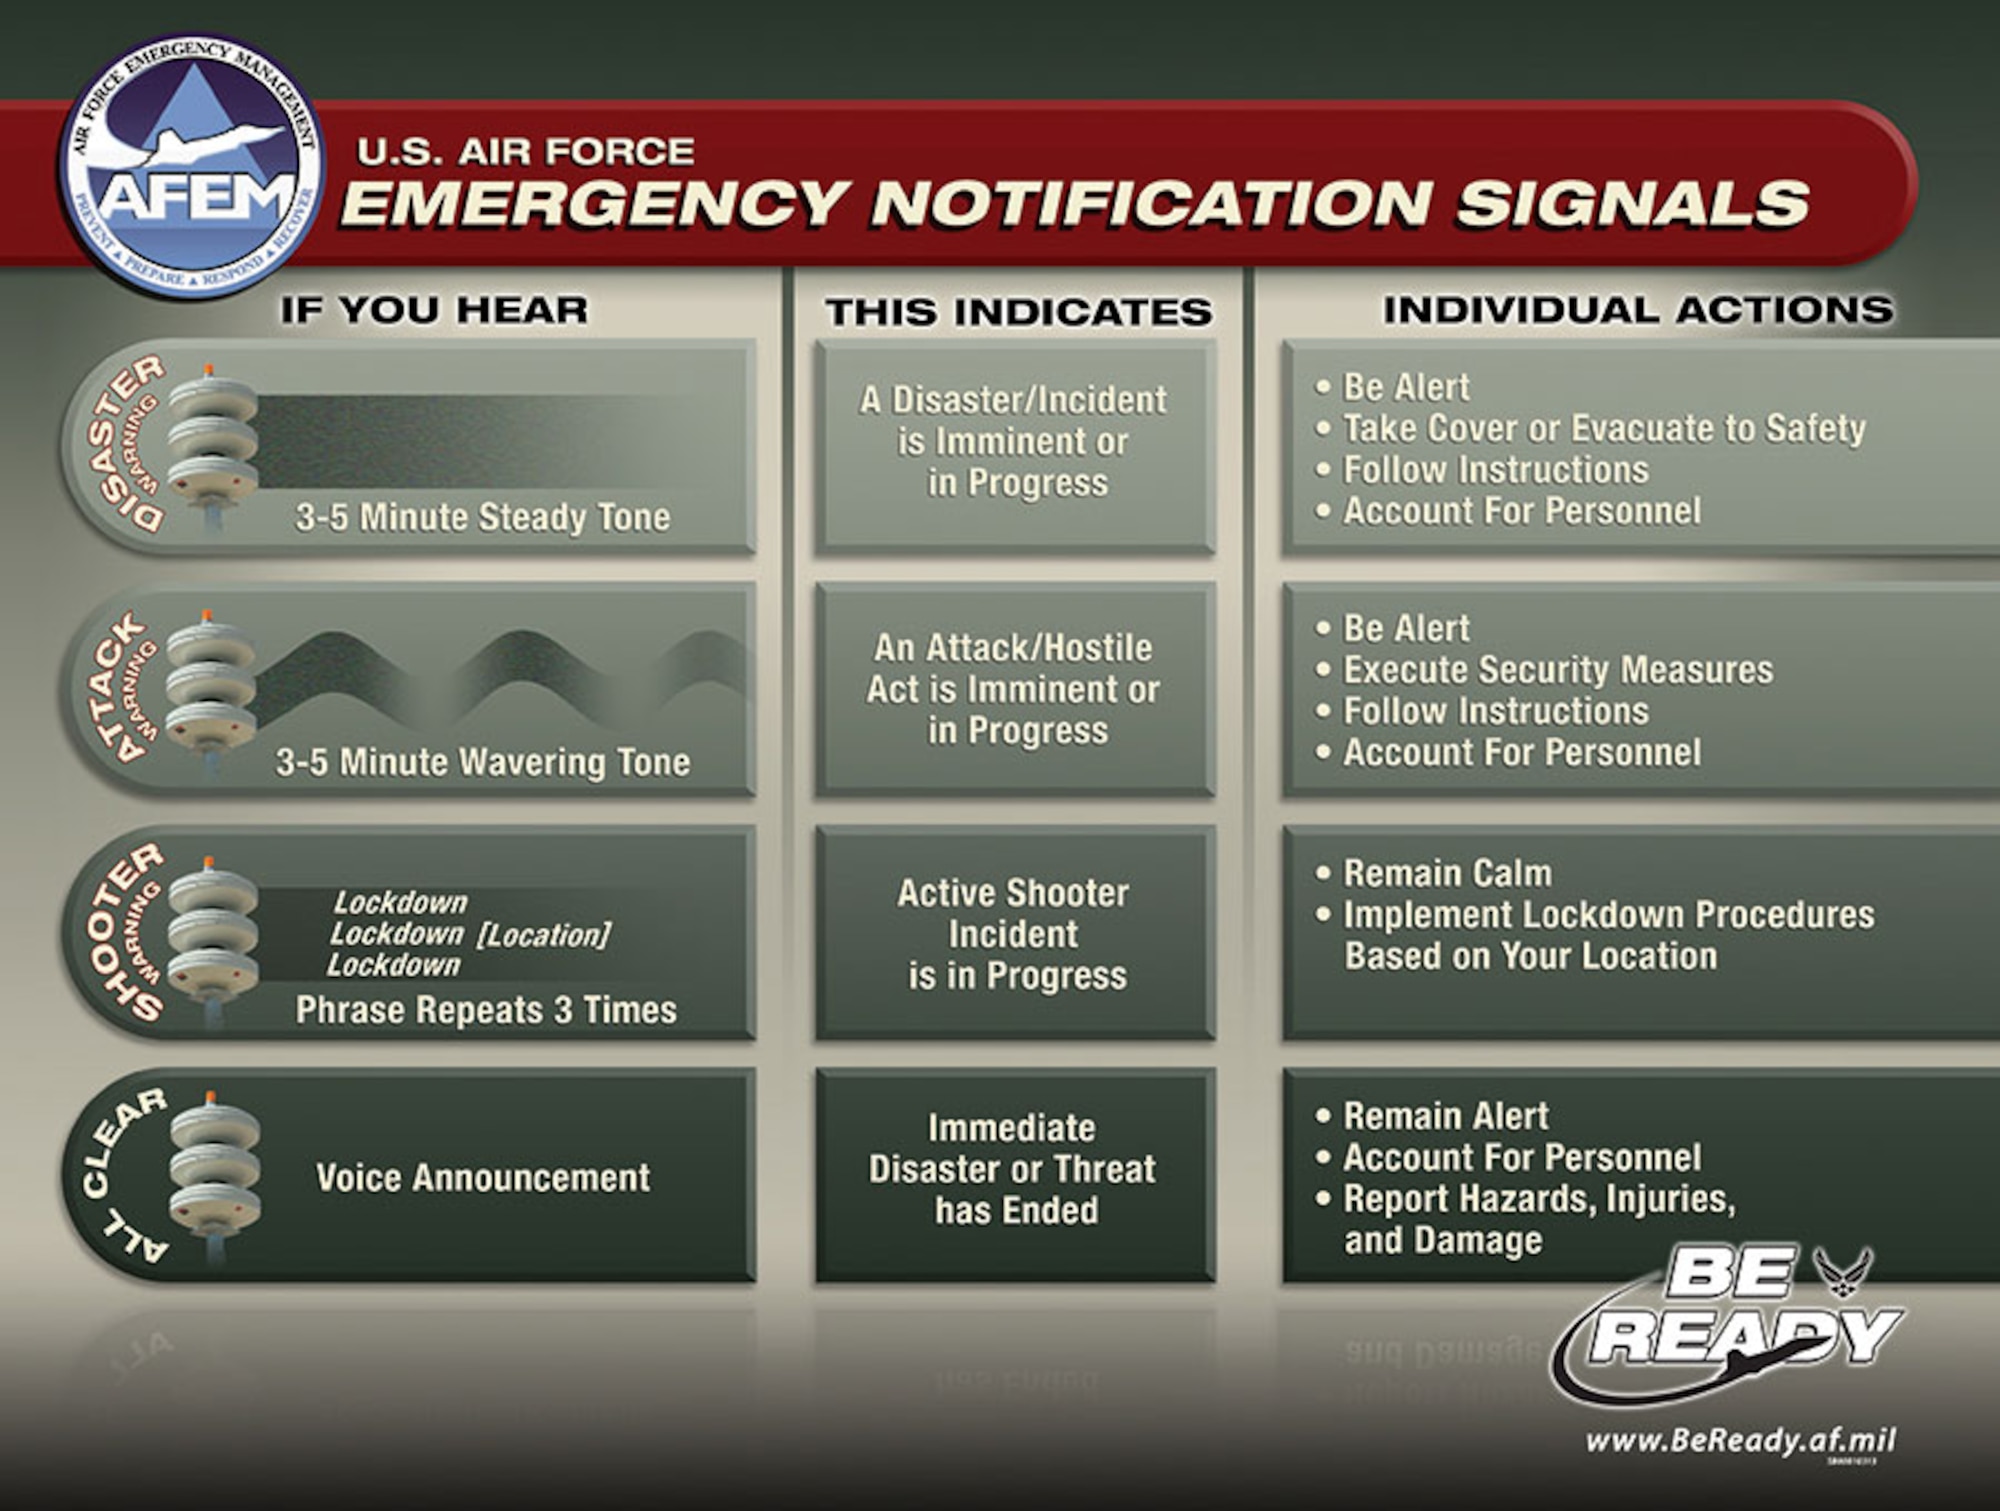 The new Air Force Emergency Notification Signal visual aid includes the new alarm for active shooter. In the event of an active shooter on base, the phrase ‘Lock down, lock down, lock down’ will be repeated three times over the base-wide public address system known as Giant Voice. When the alarm is sounded, it means that an active shooter incident is in progress and all personnel should take immediate action to implement lock down procedures based on their location. (U.S. Air Force graphic)